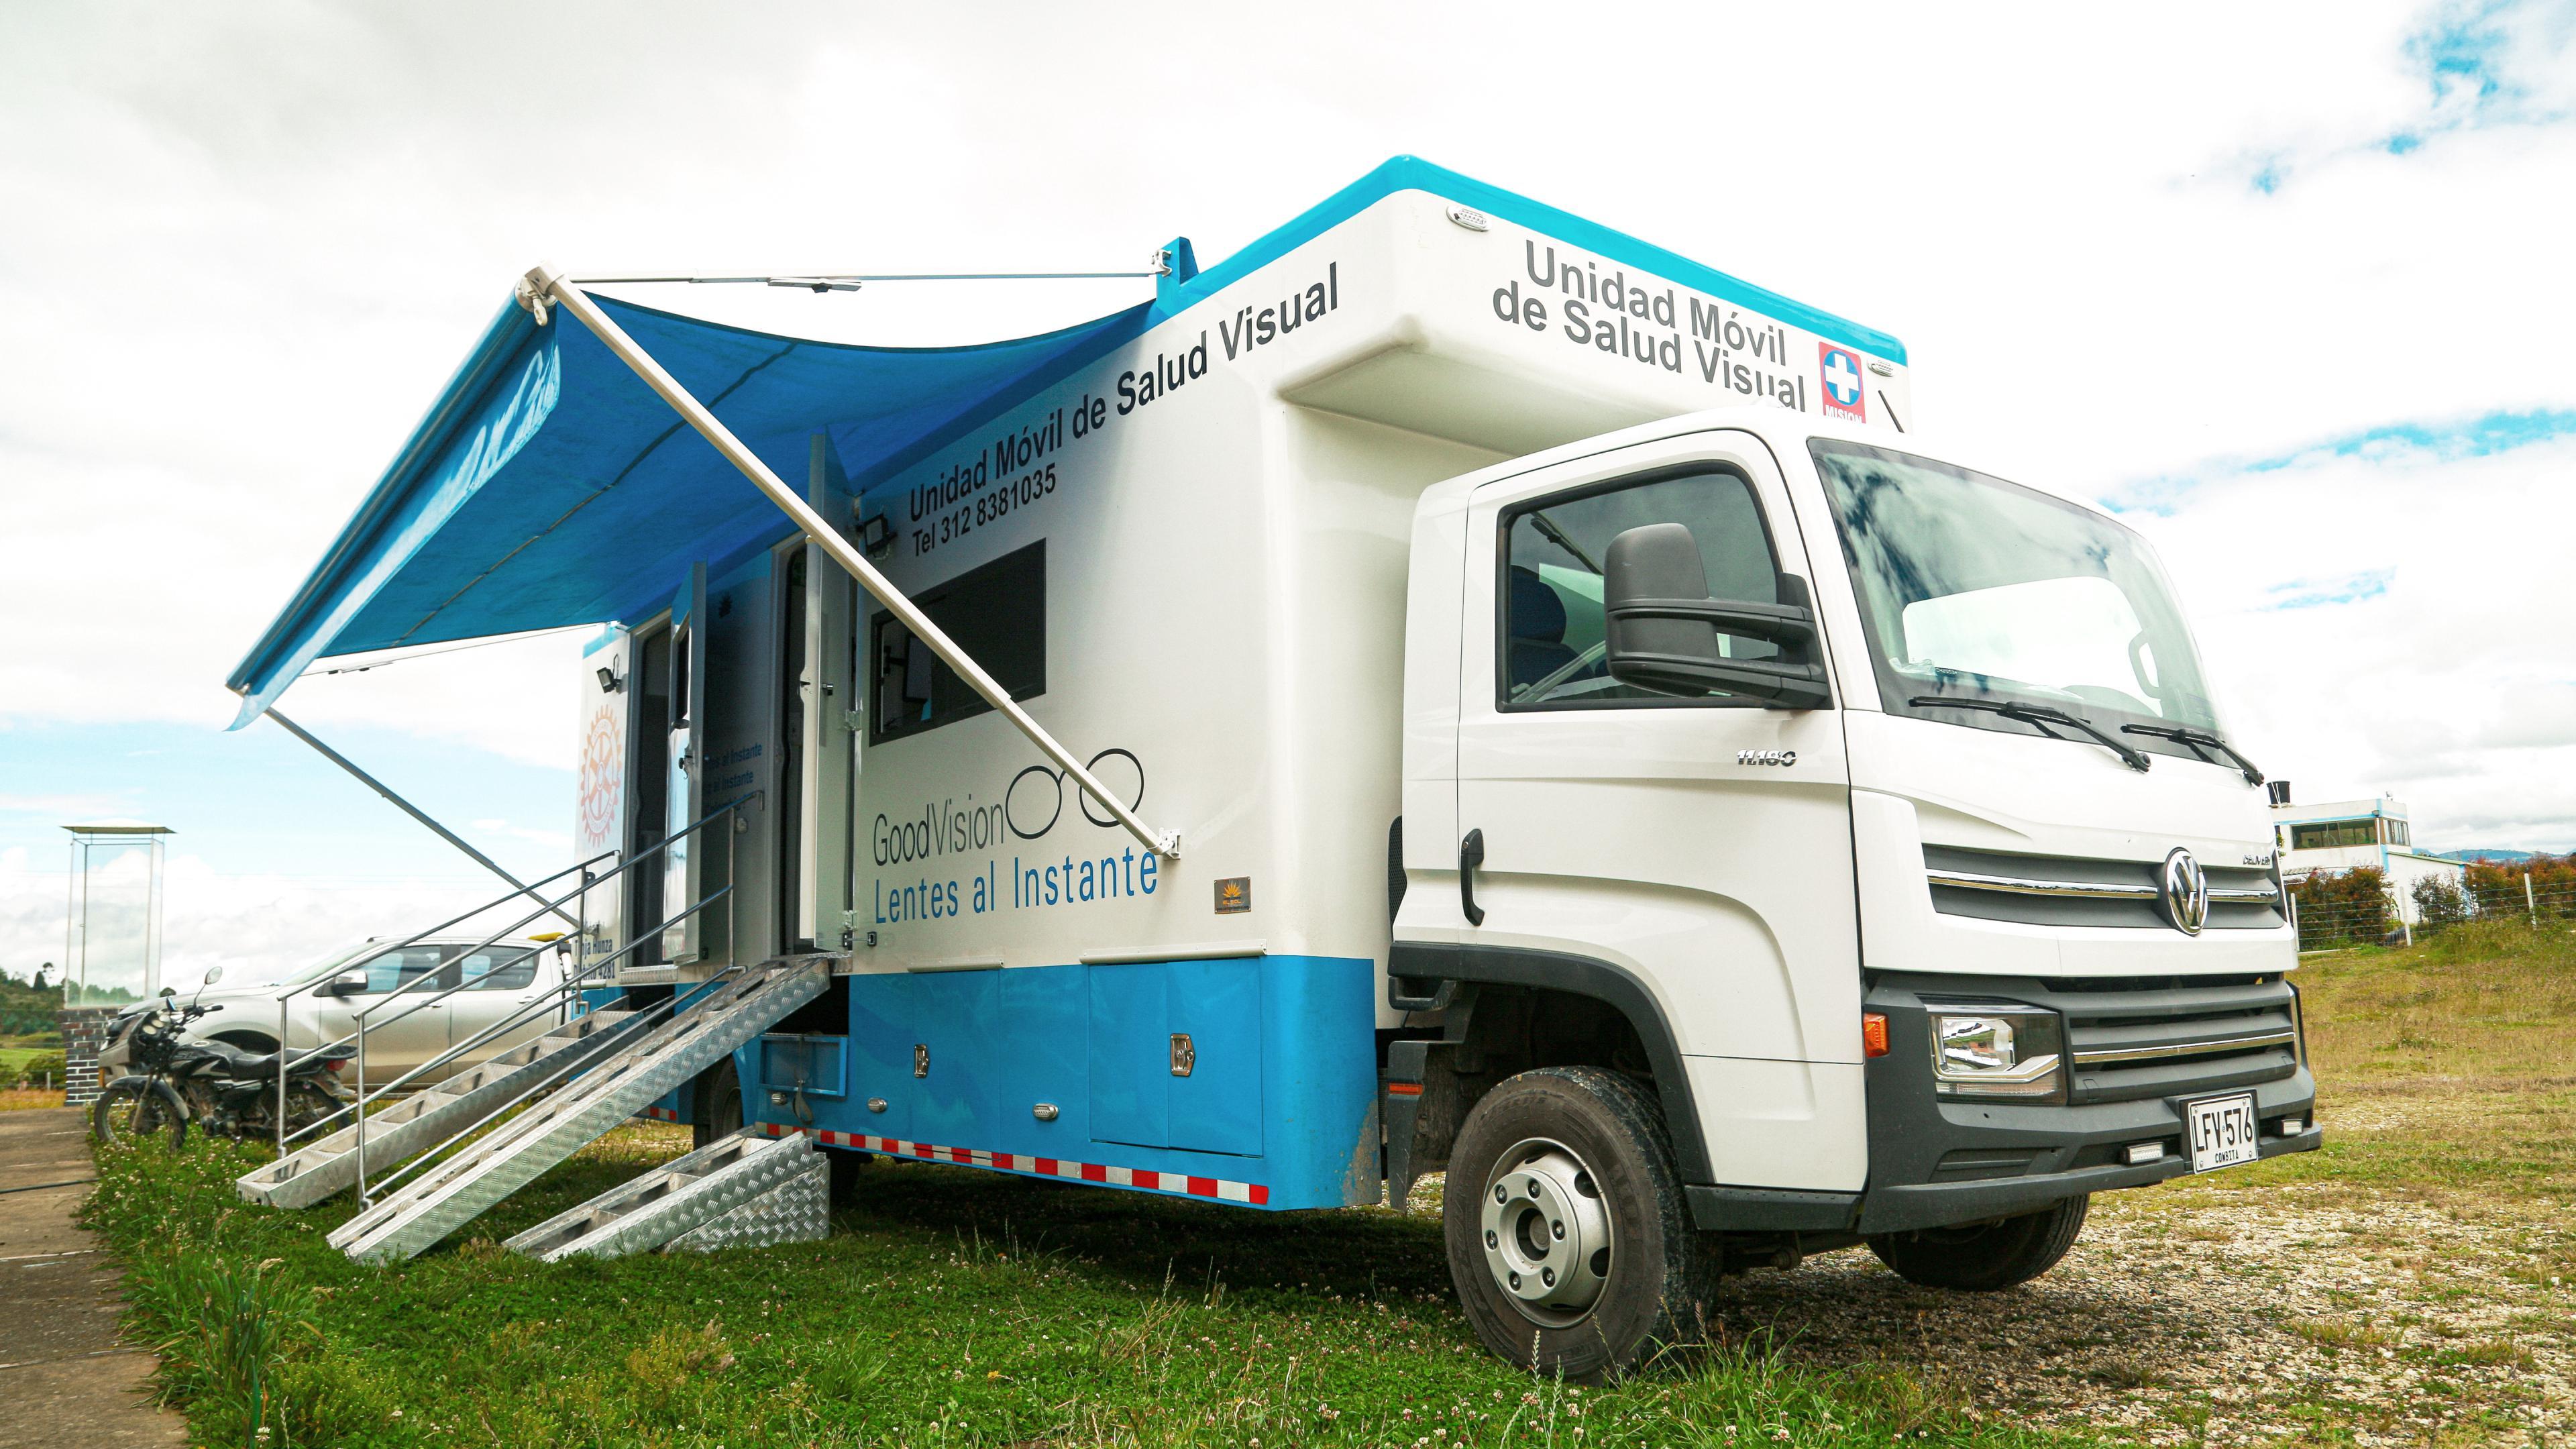 Mobile vision center in Colombia